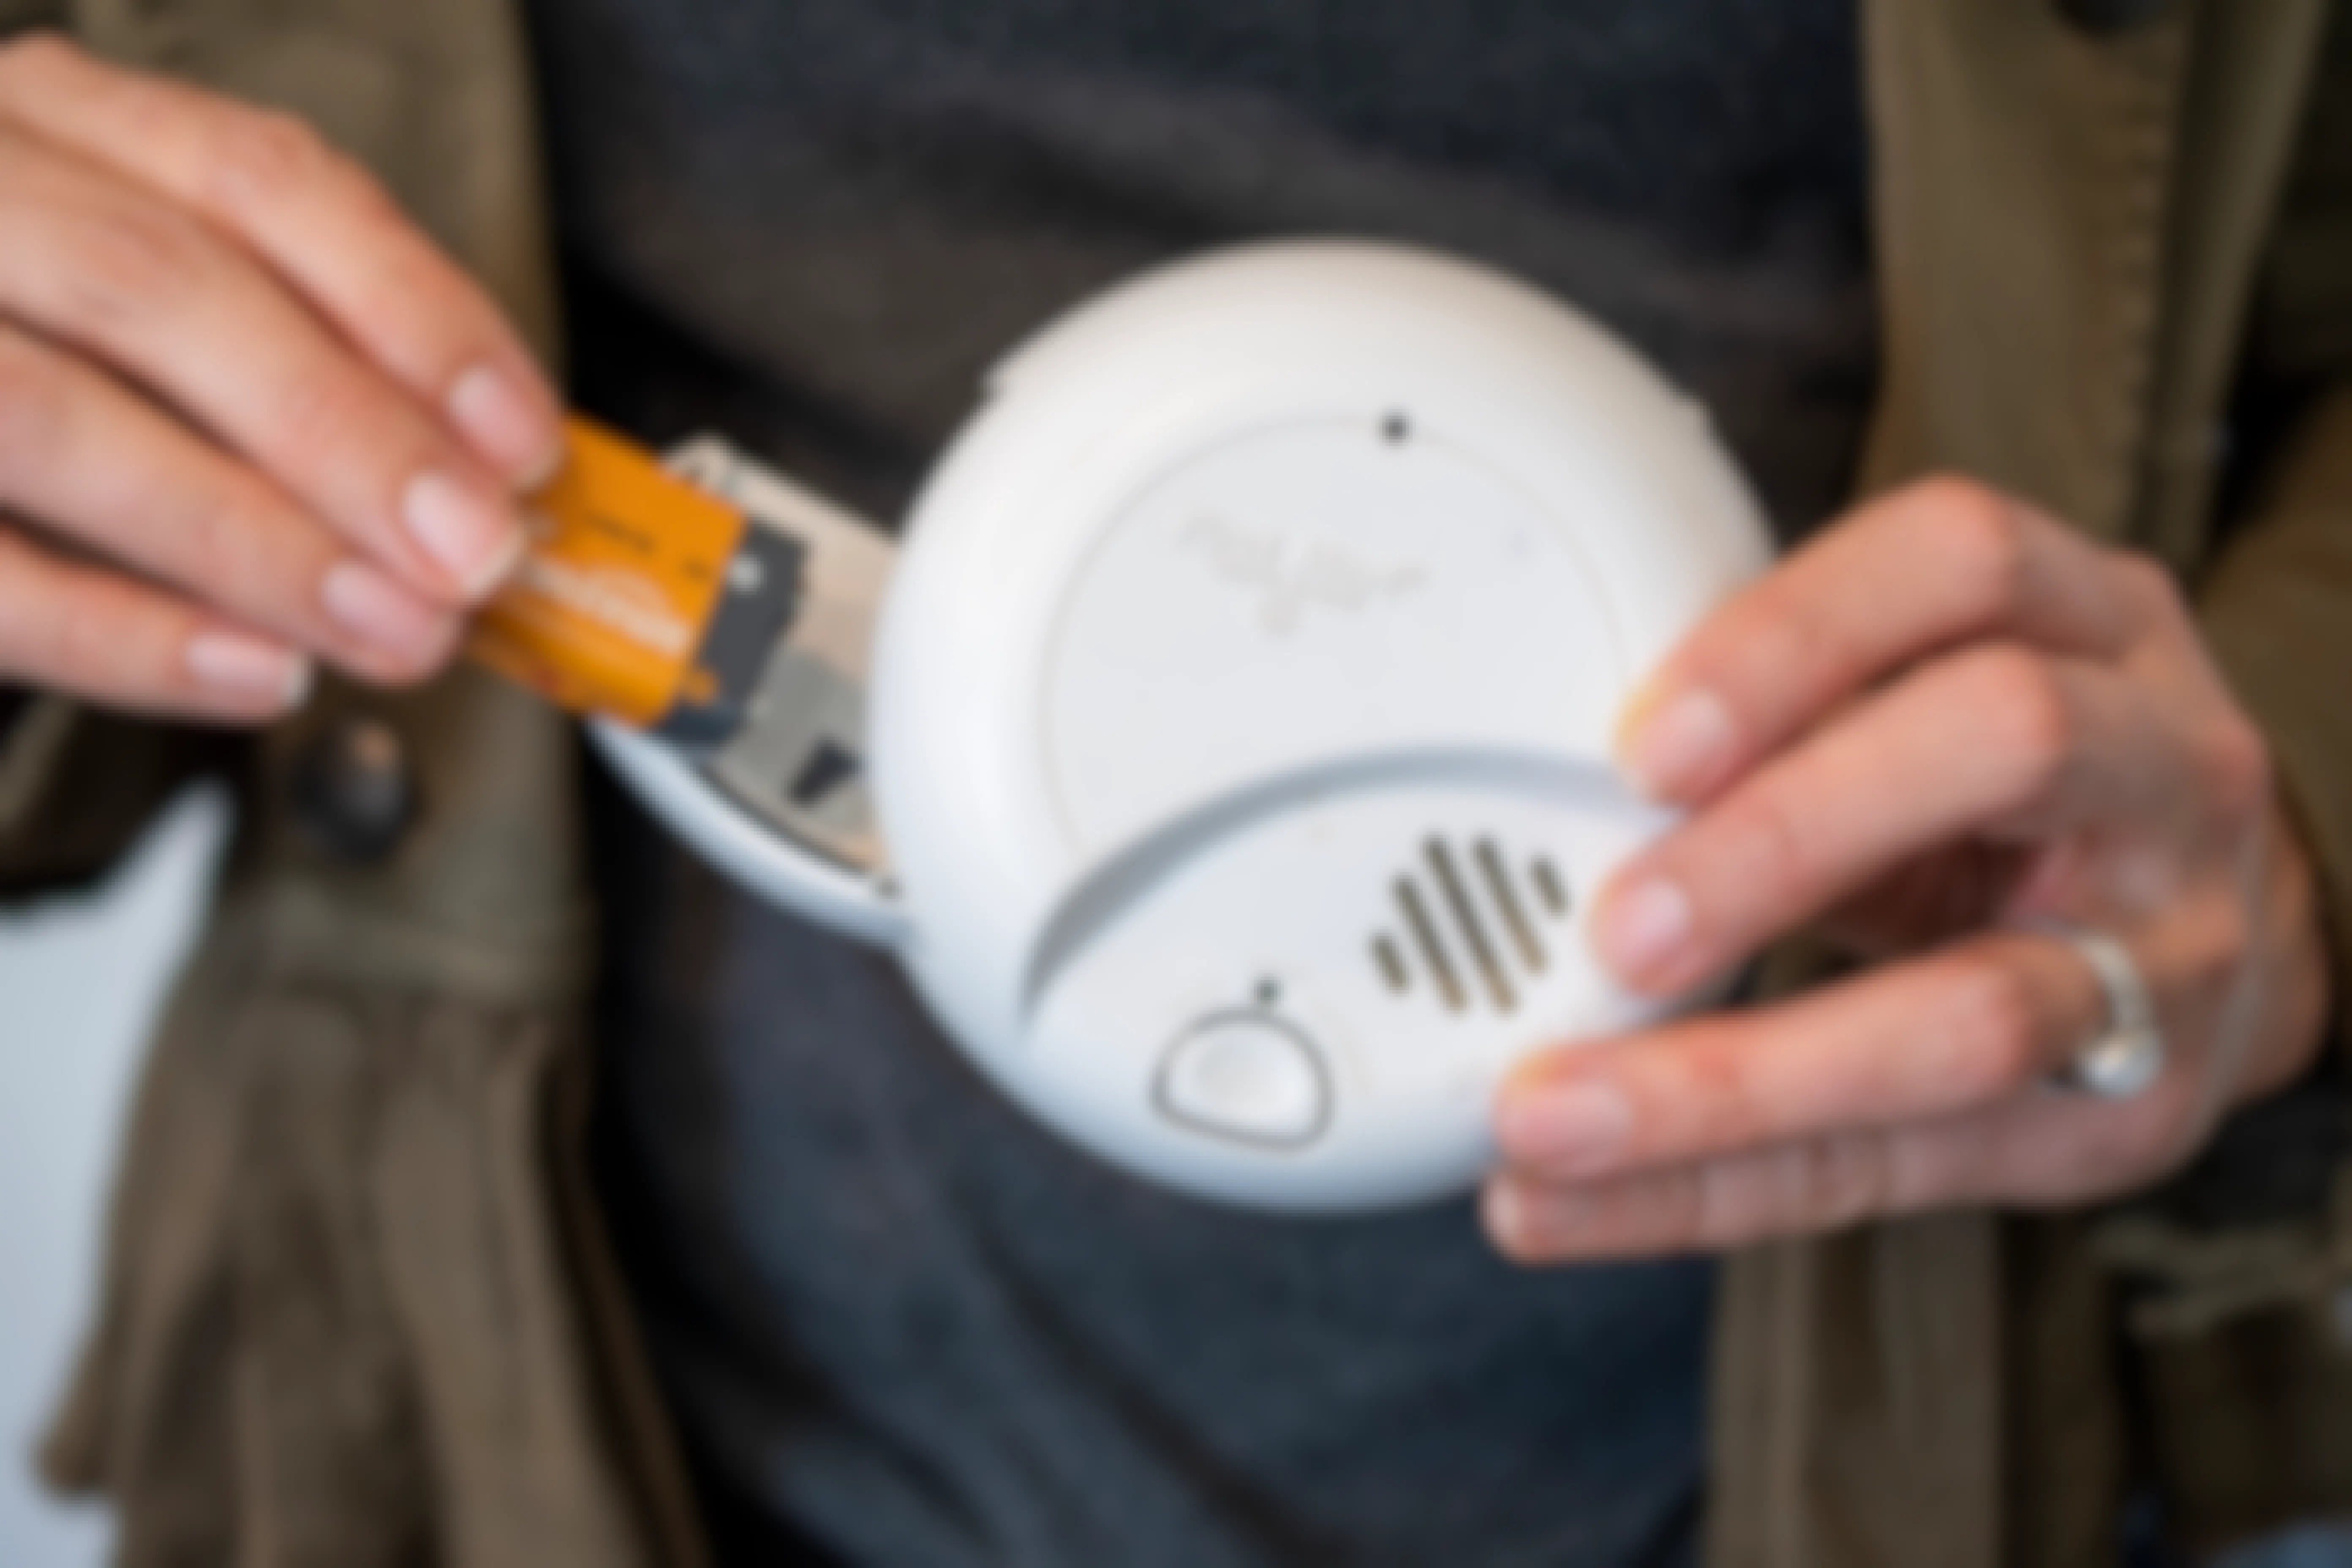 A person holding batteries and a smoke alarm.